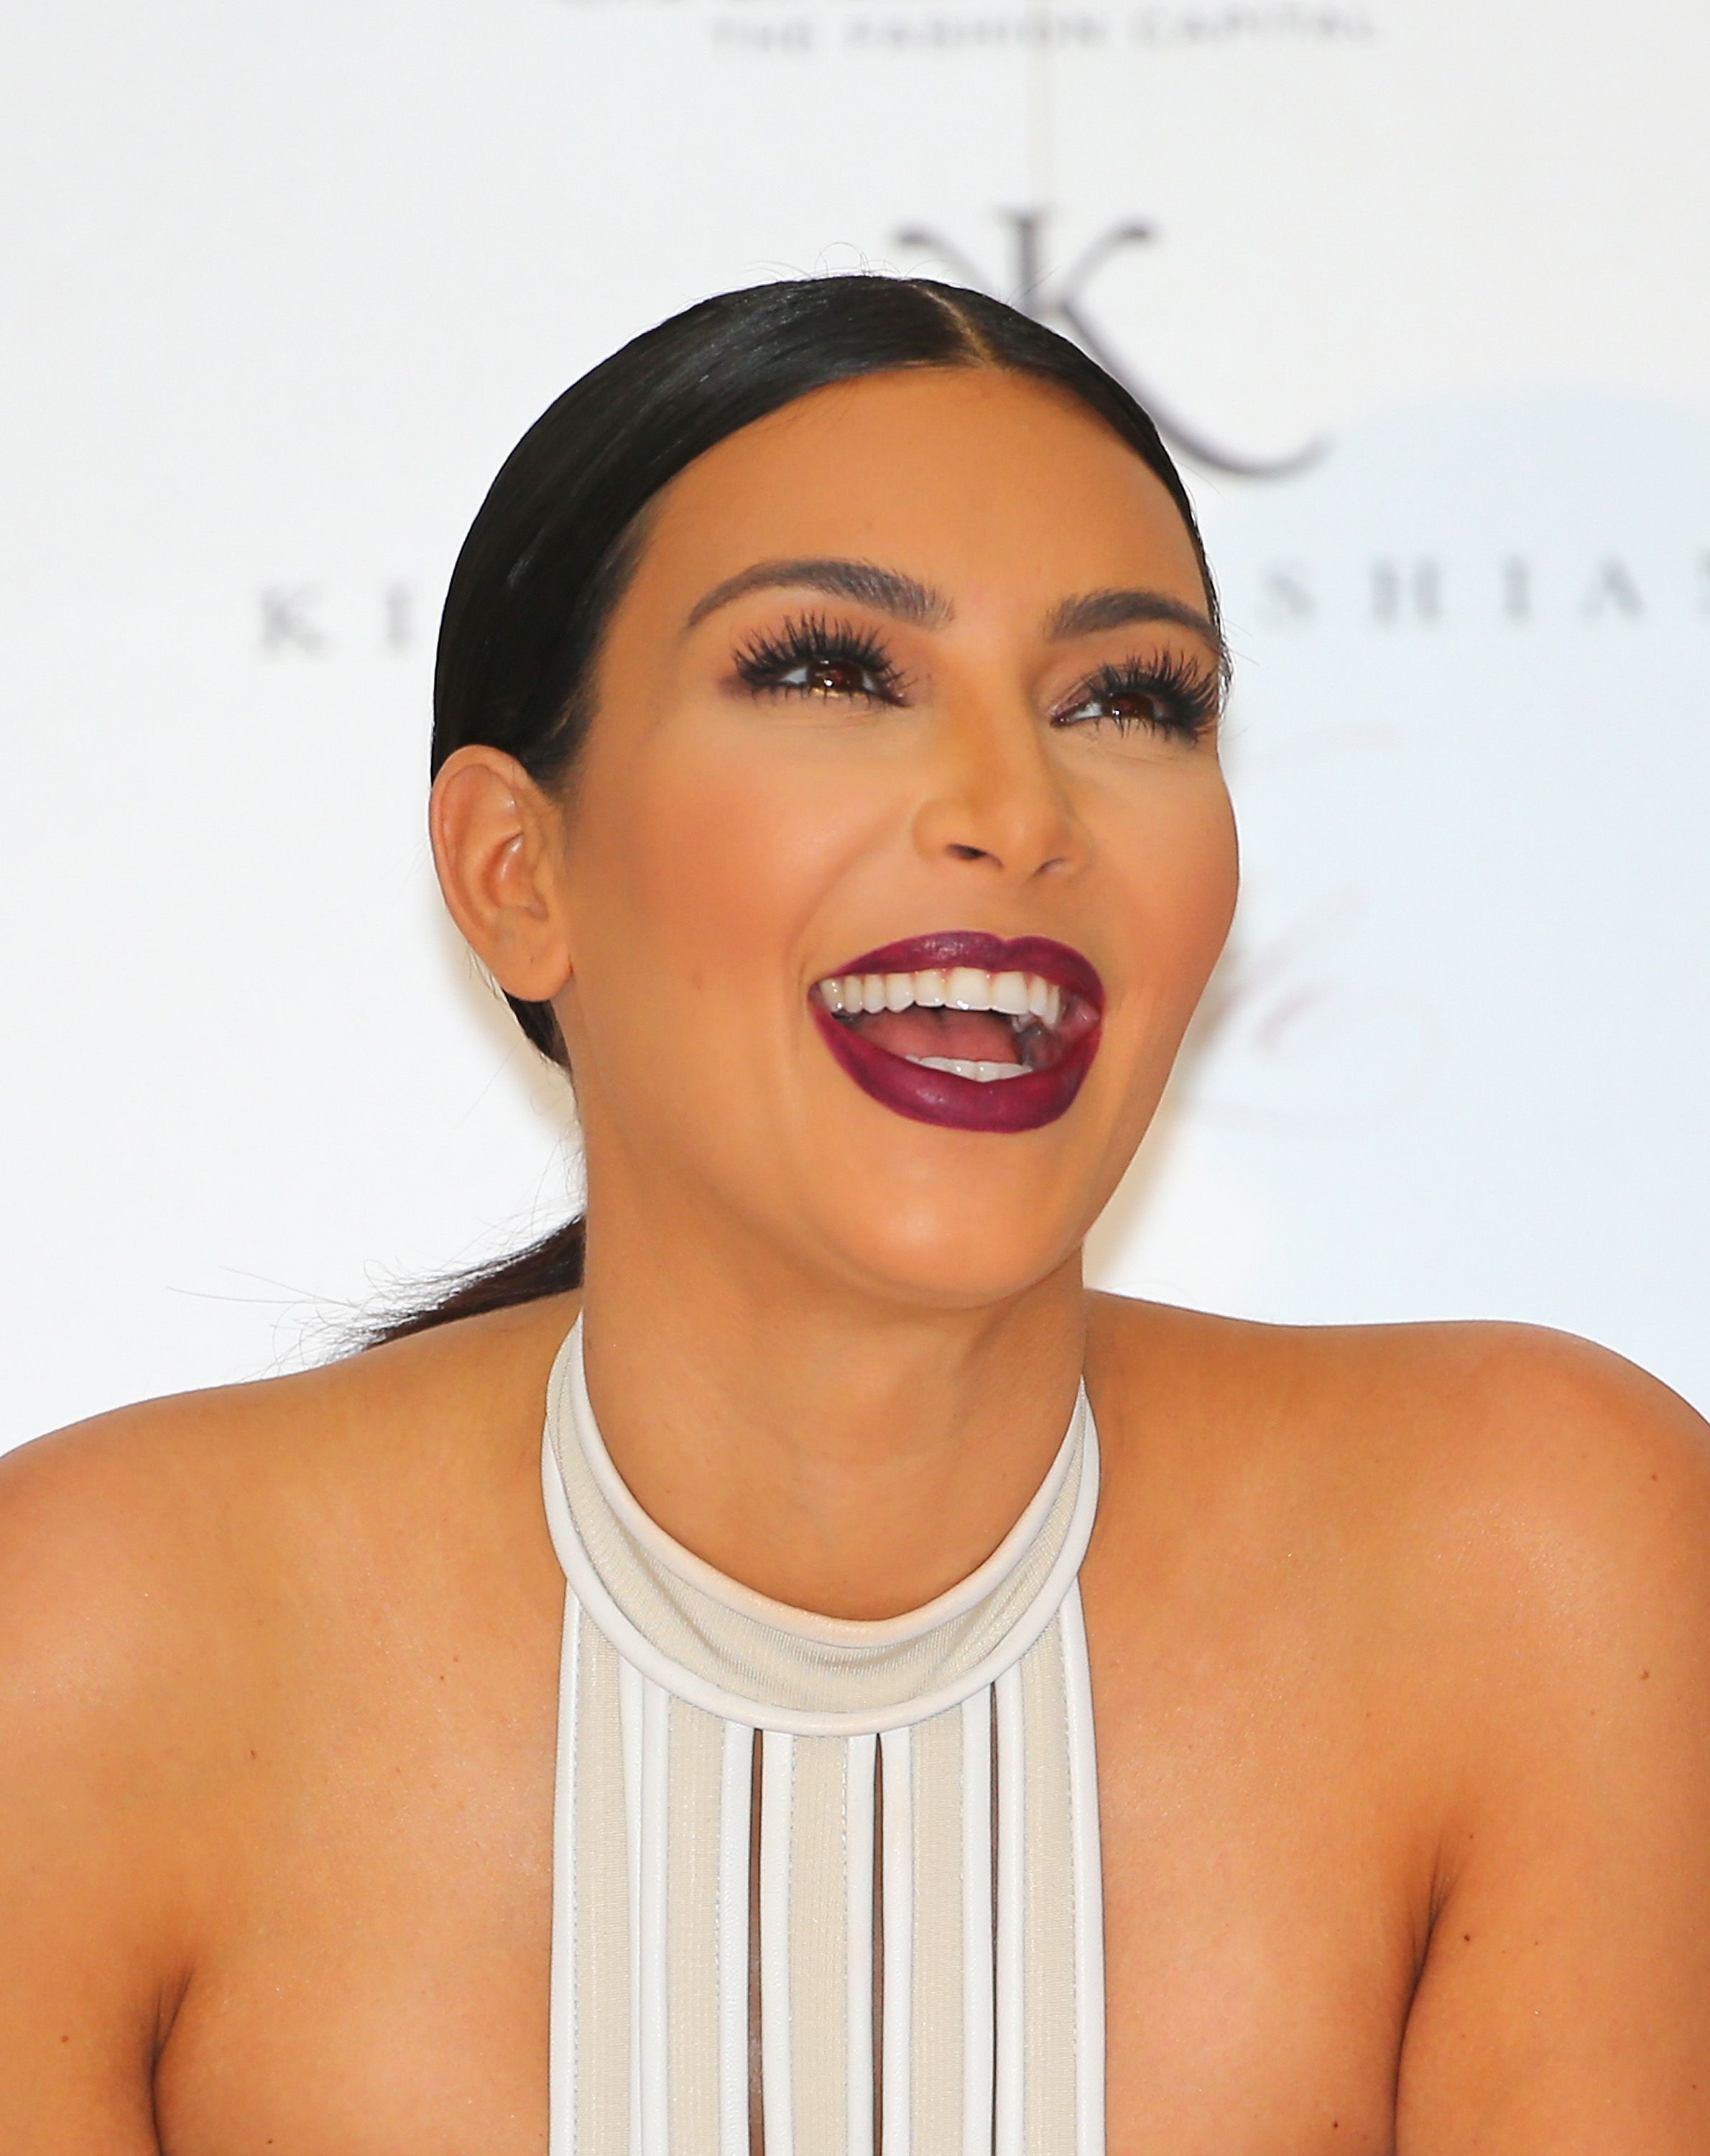 Kim Kardashian during the "Fleur Fatale" promotion at Chadstone Shopping Centre on November 19, 2014 in Melbourne, Australia. | Source: Getty Images